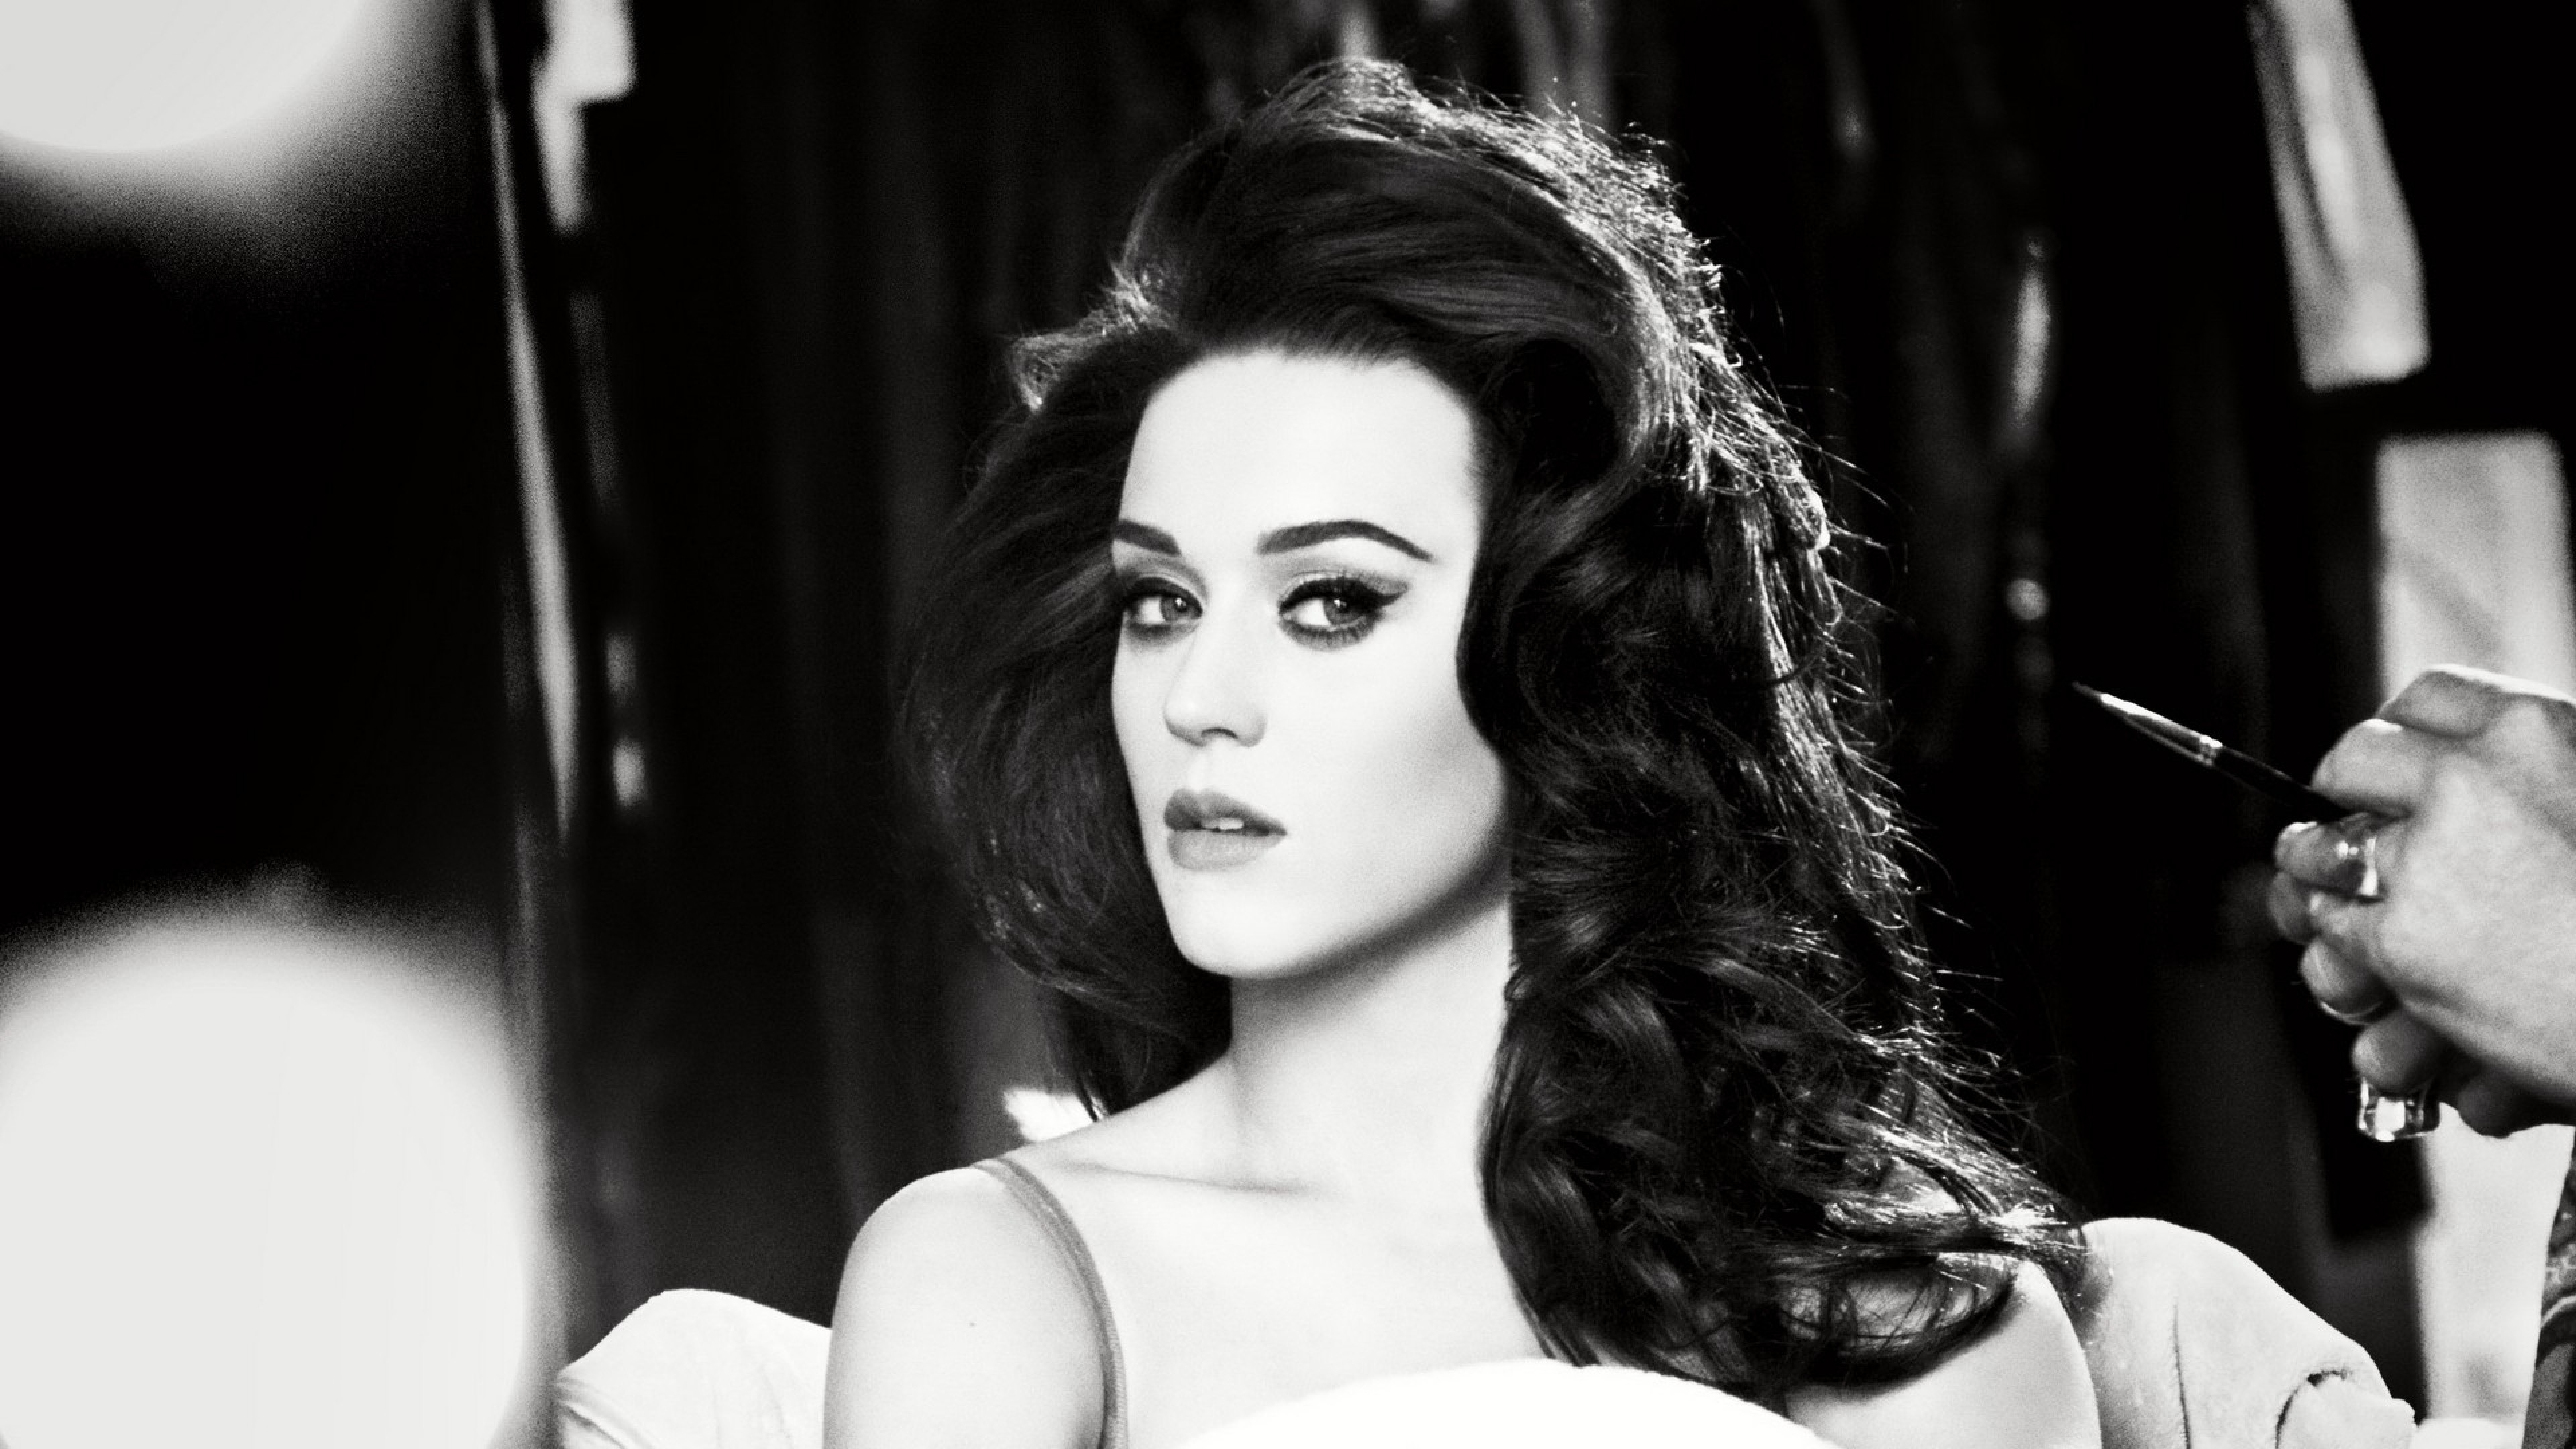 3840x2160  Wallpaper katy perry, eyes, face, singer, black and white